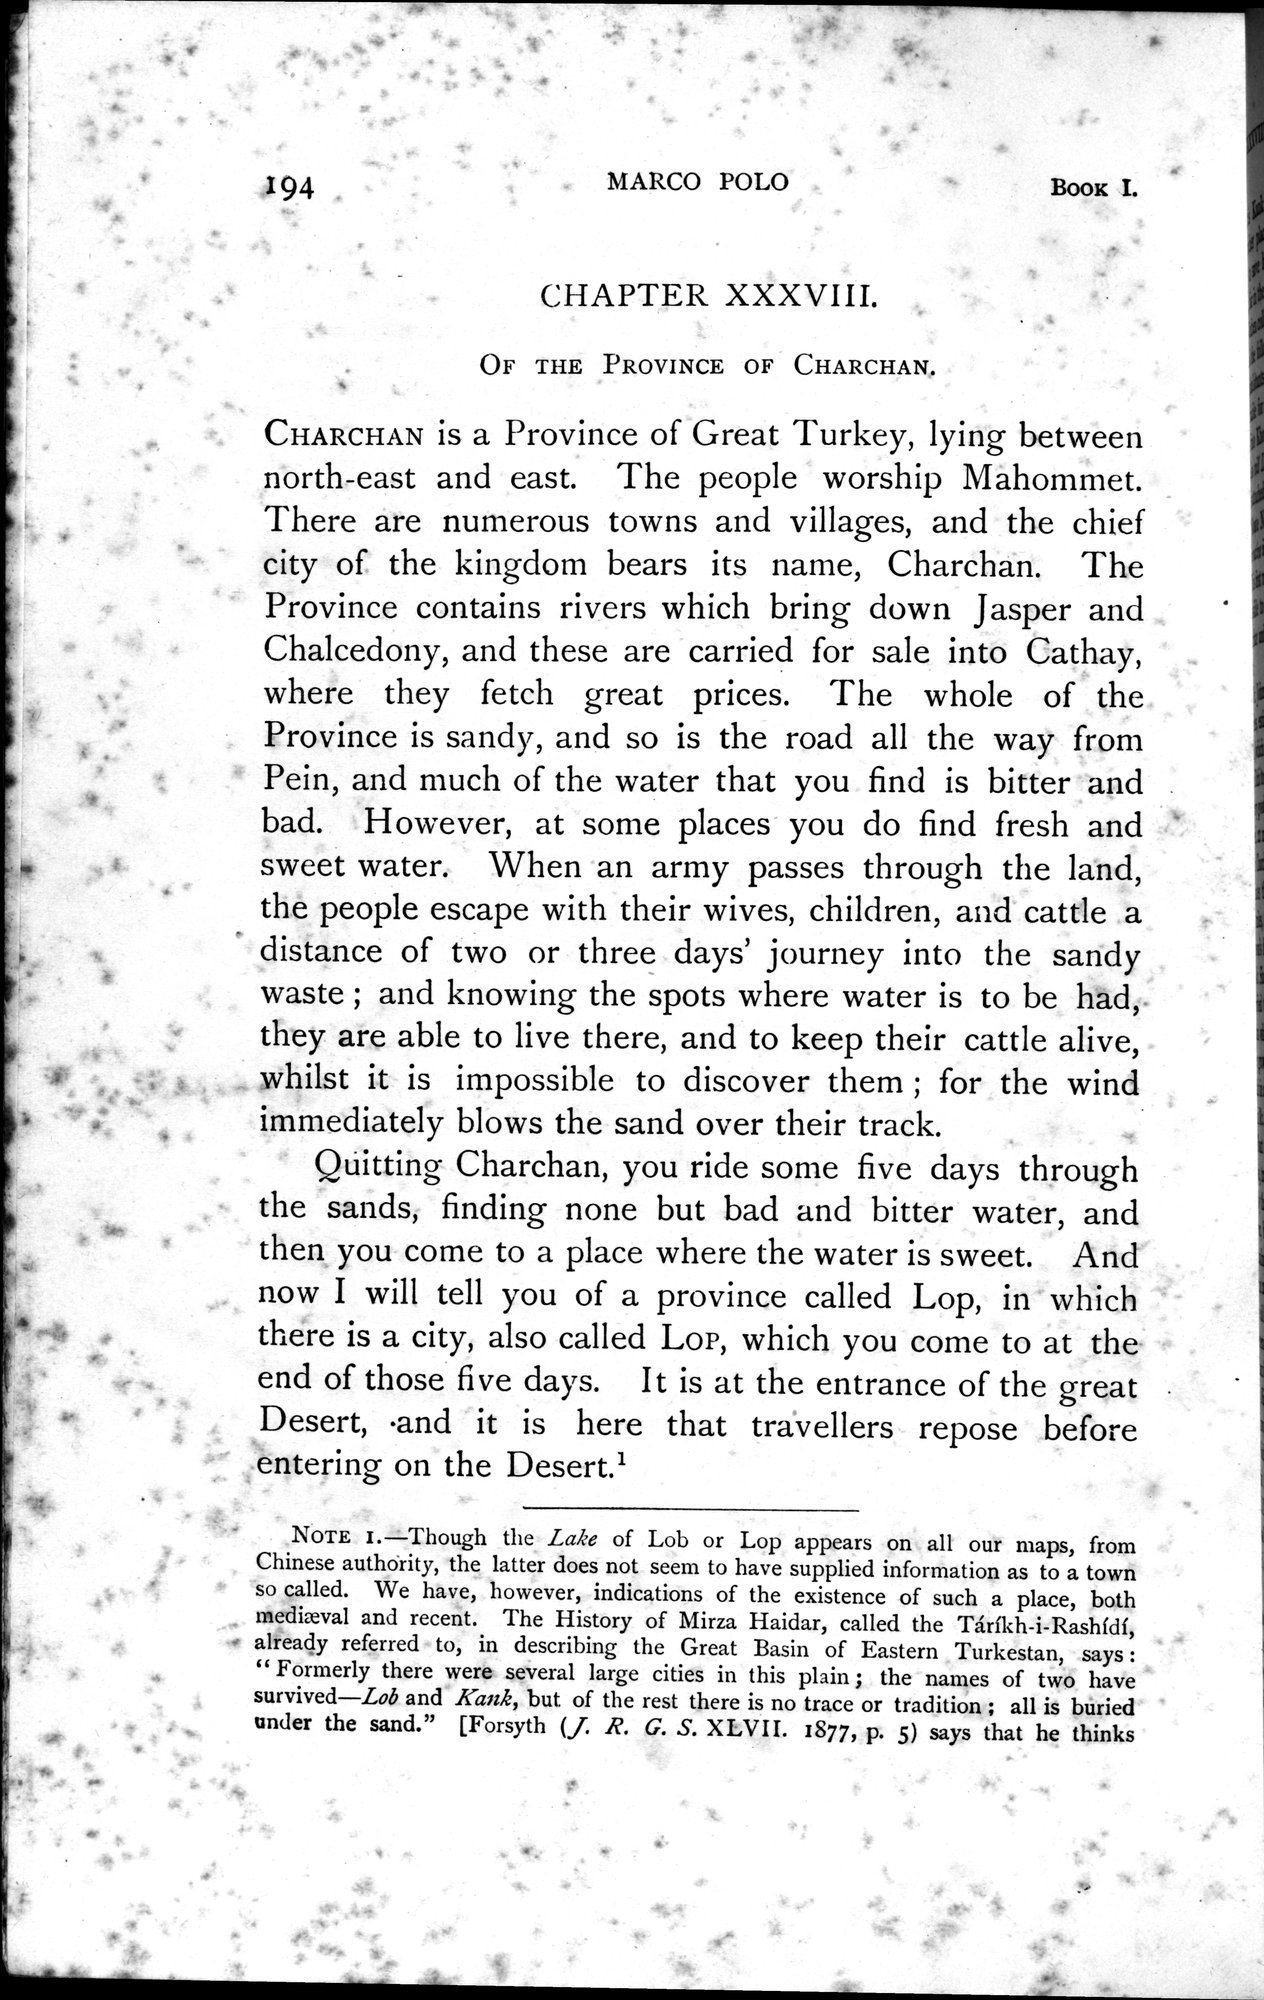 The Book of Ser Marco Polo : vol.1 / Page 496 (Grayscale High Resolution Image)